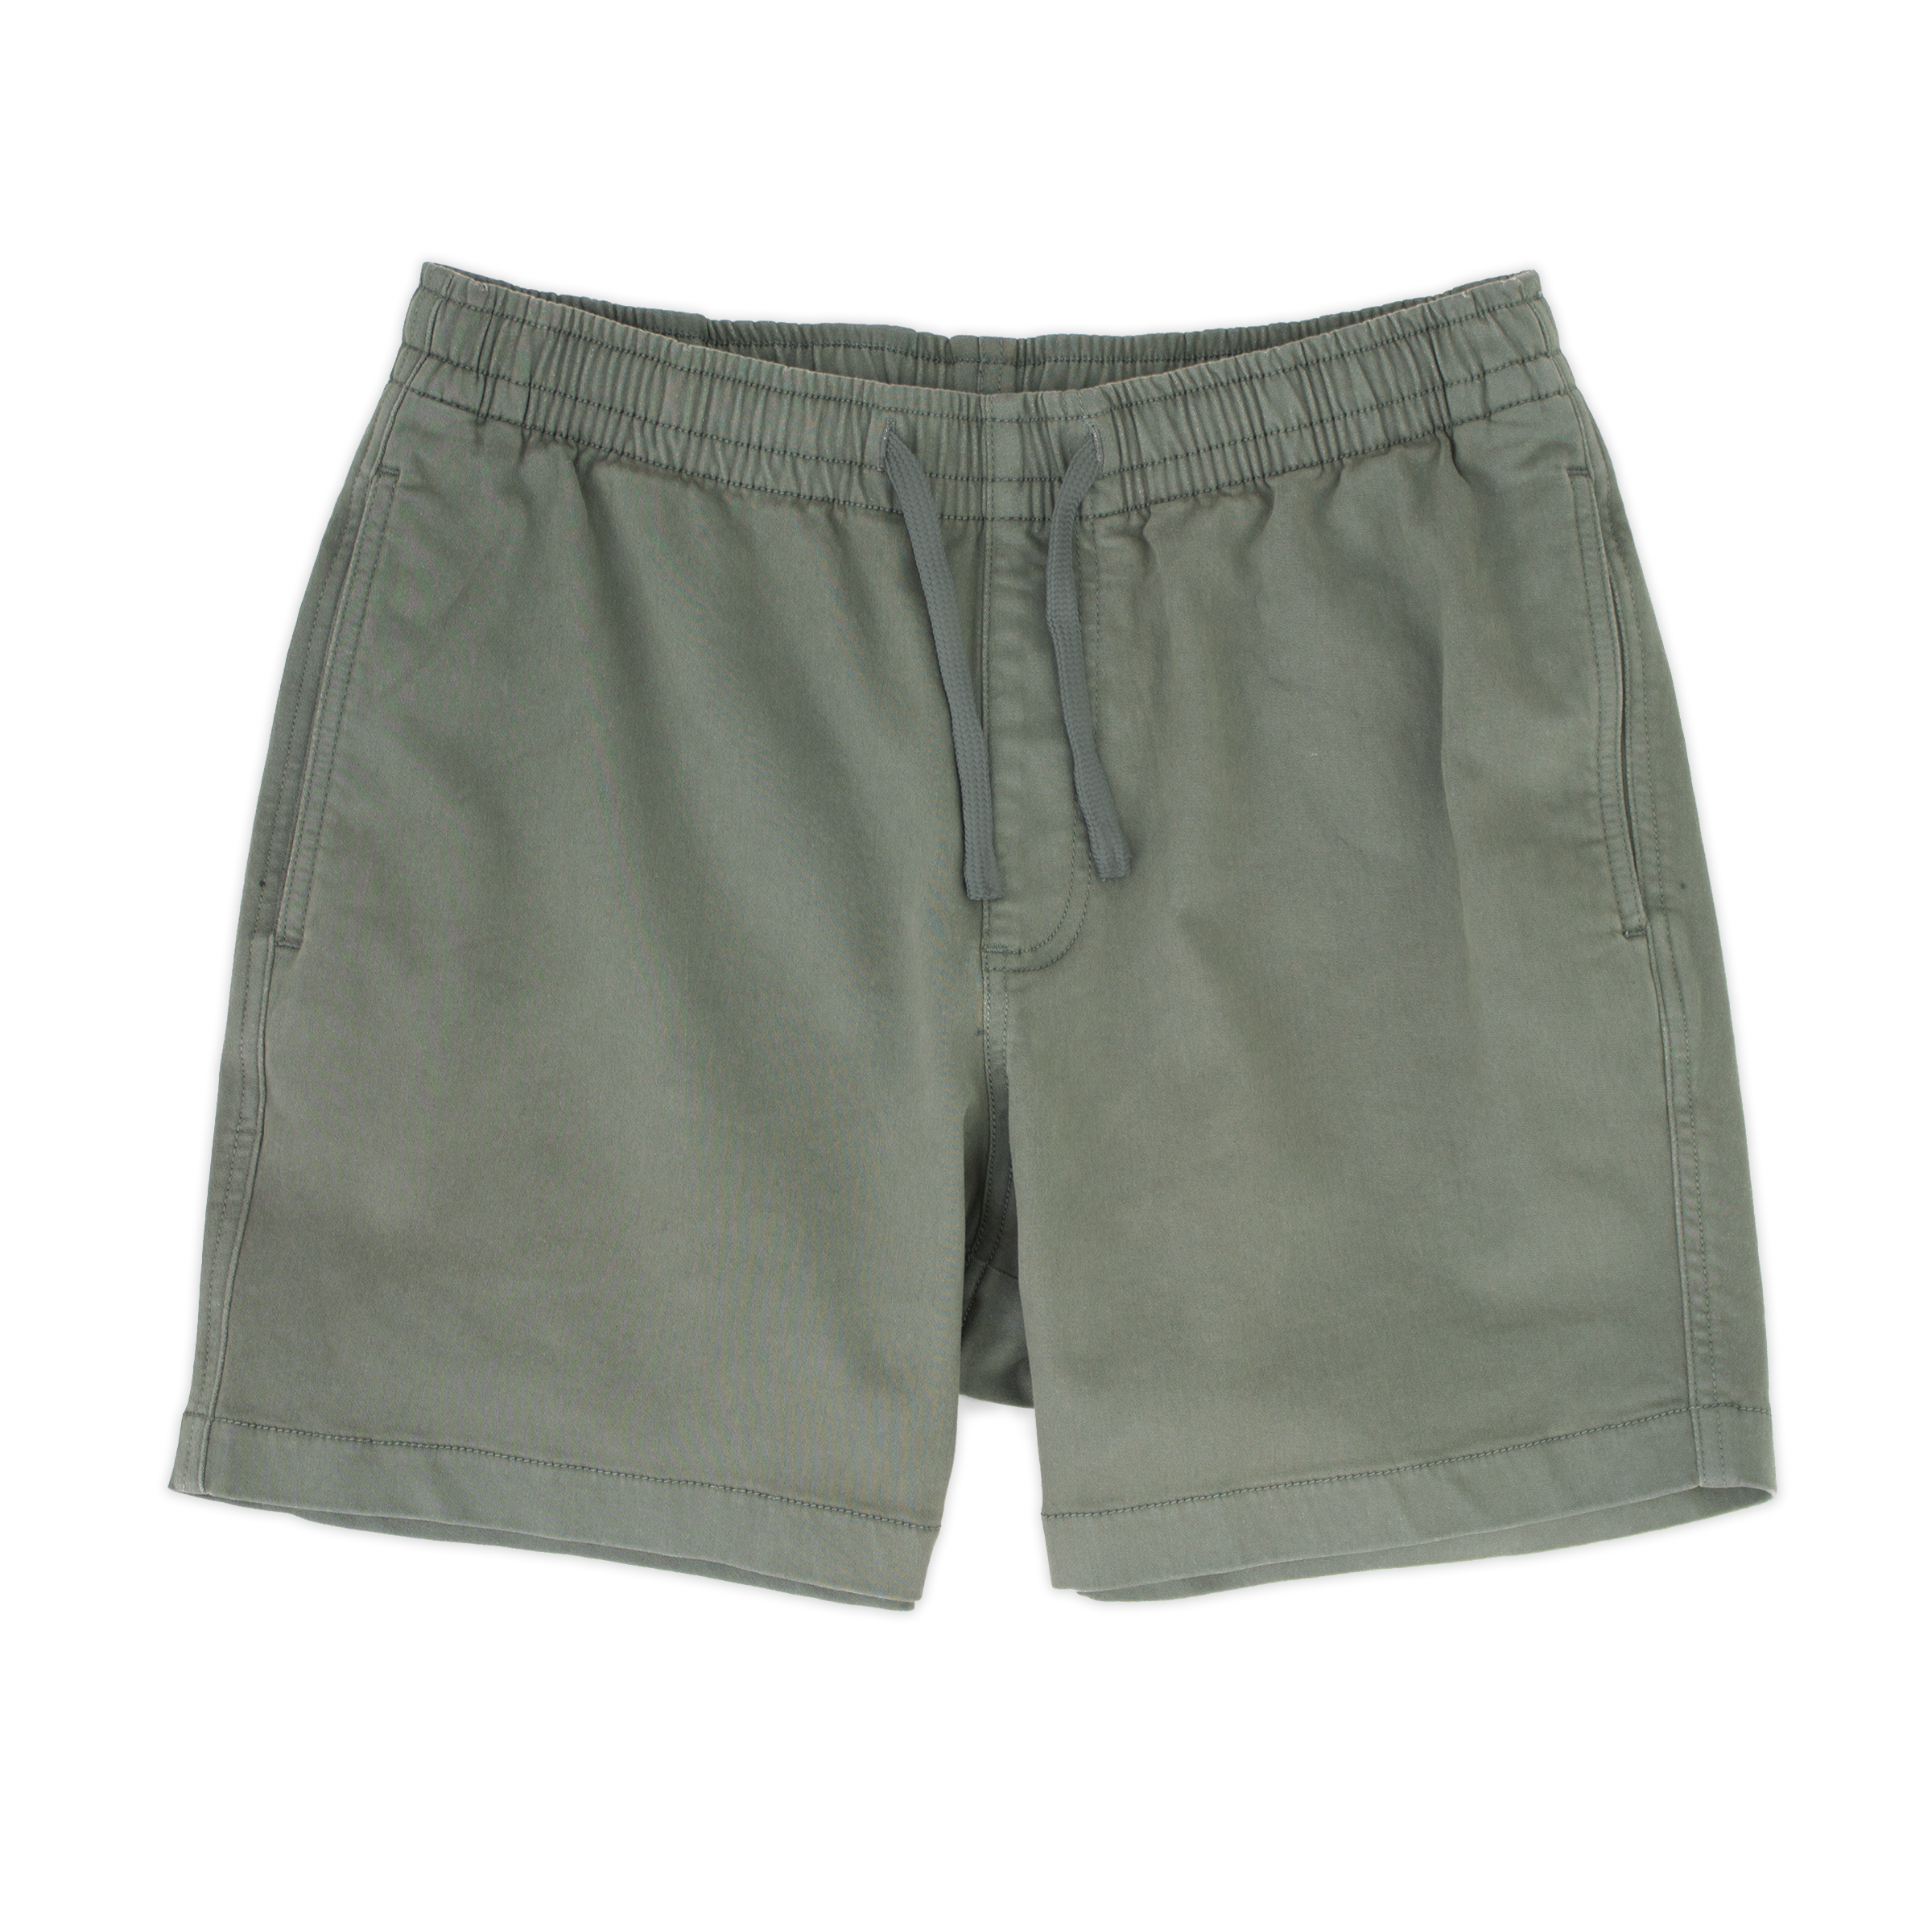 Alto Short 5.5" inseam in Grey front with elastic waistband, fabric drawstring, faux fly, and two front side seam pockets